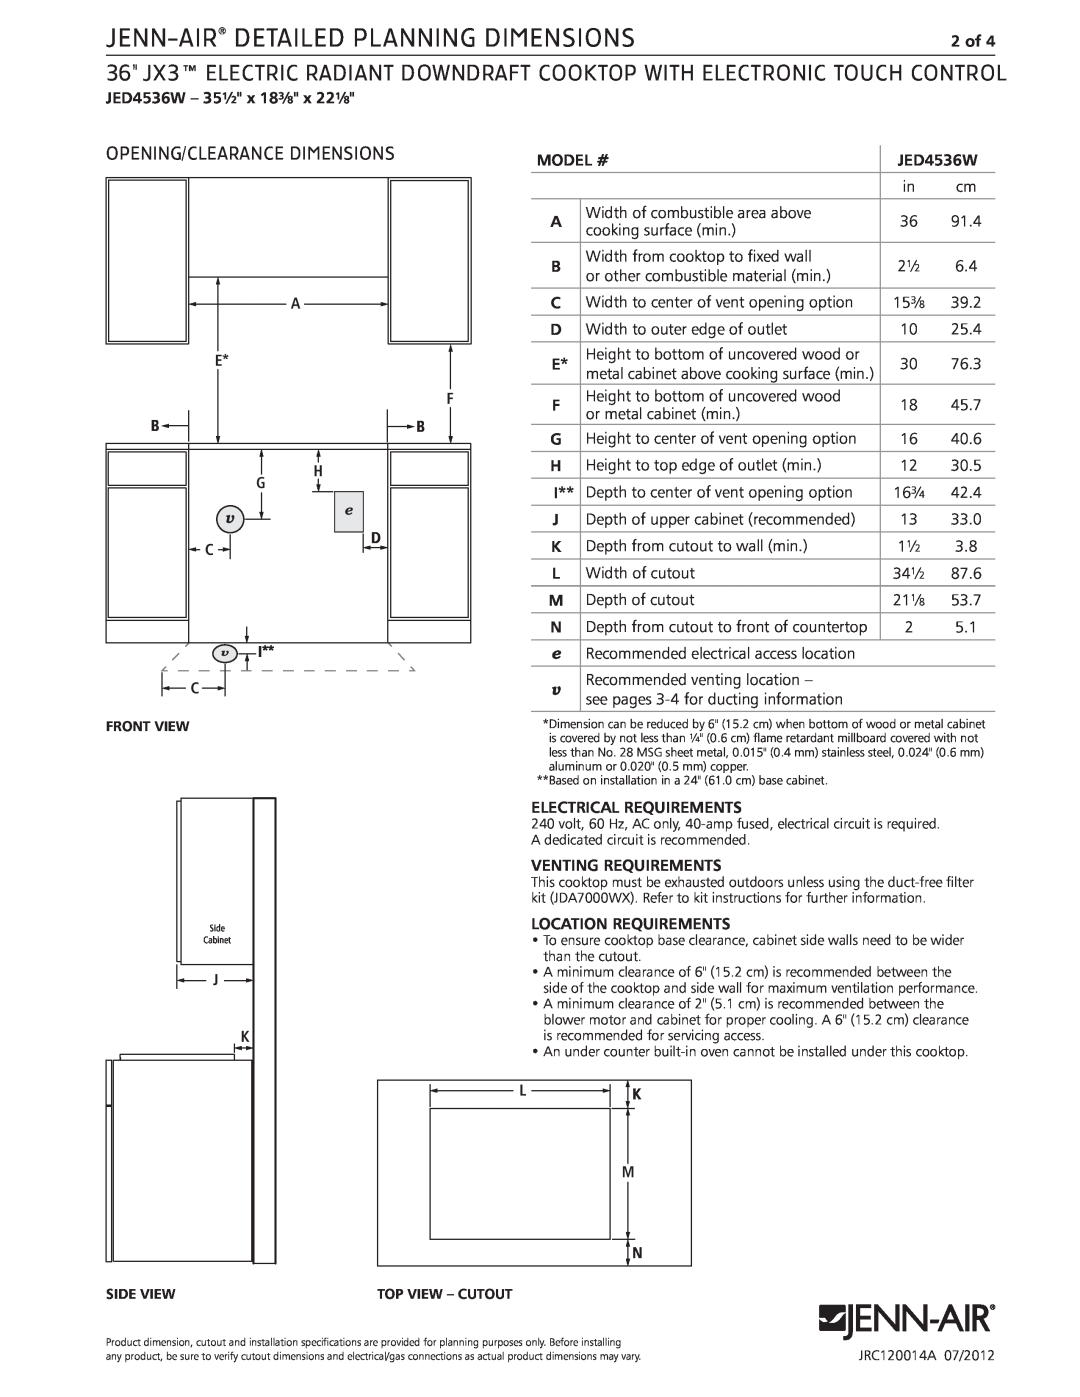 Jenn-Air JED4536W dimensions Opening/Clearance Dimensions, Jenn-Air Detailed Planning Dimensions 